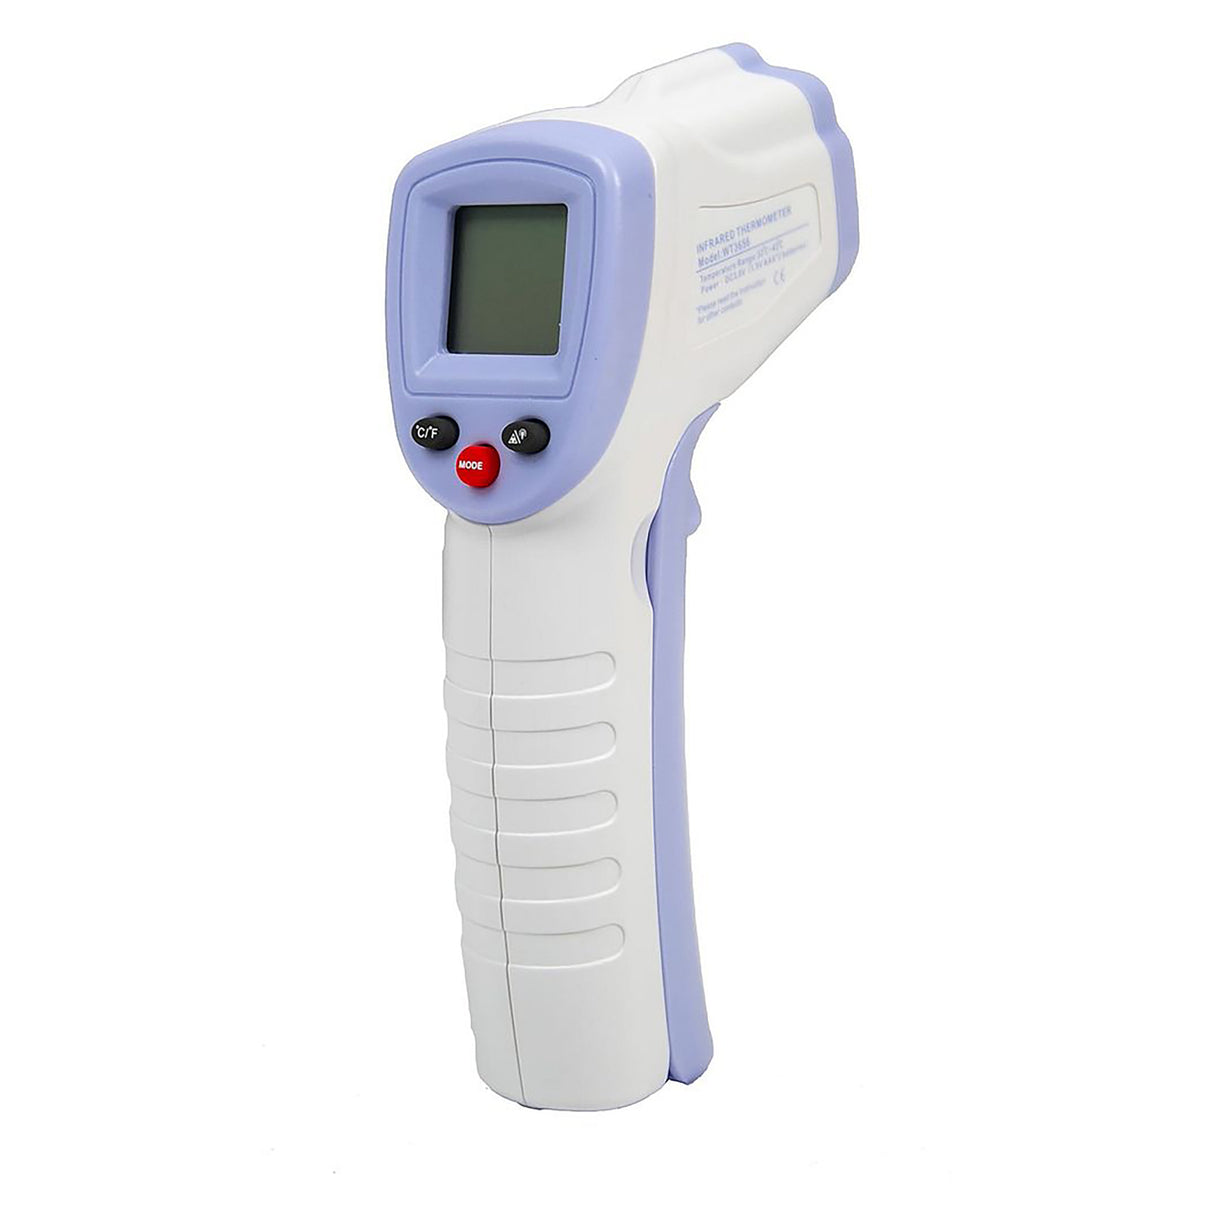 Wintact Non-Contact Infrared Baby Thermometer, White